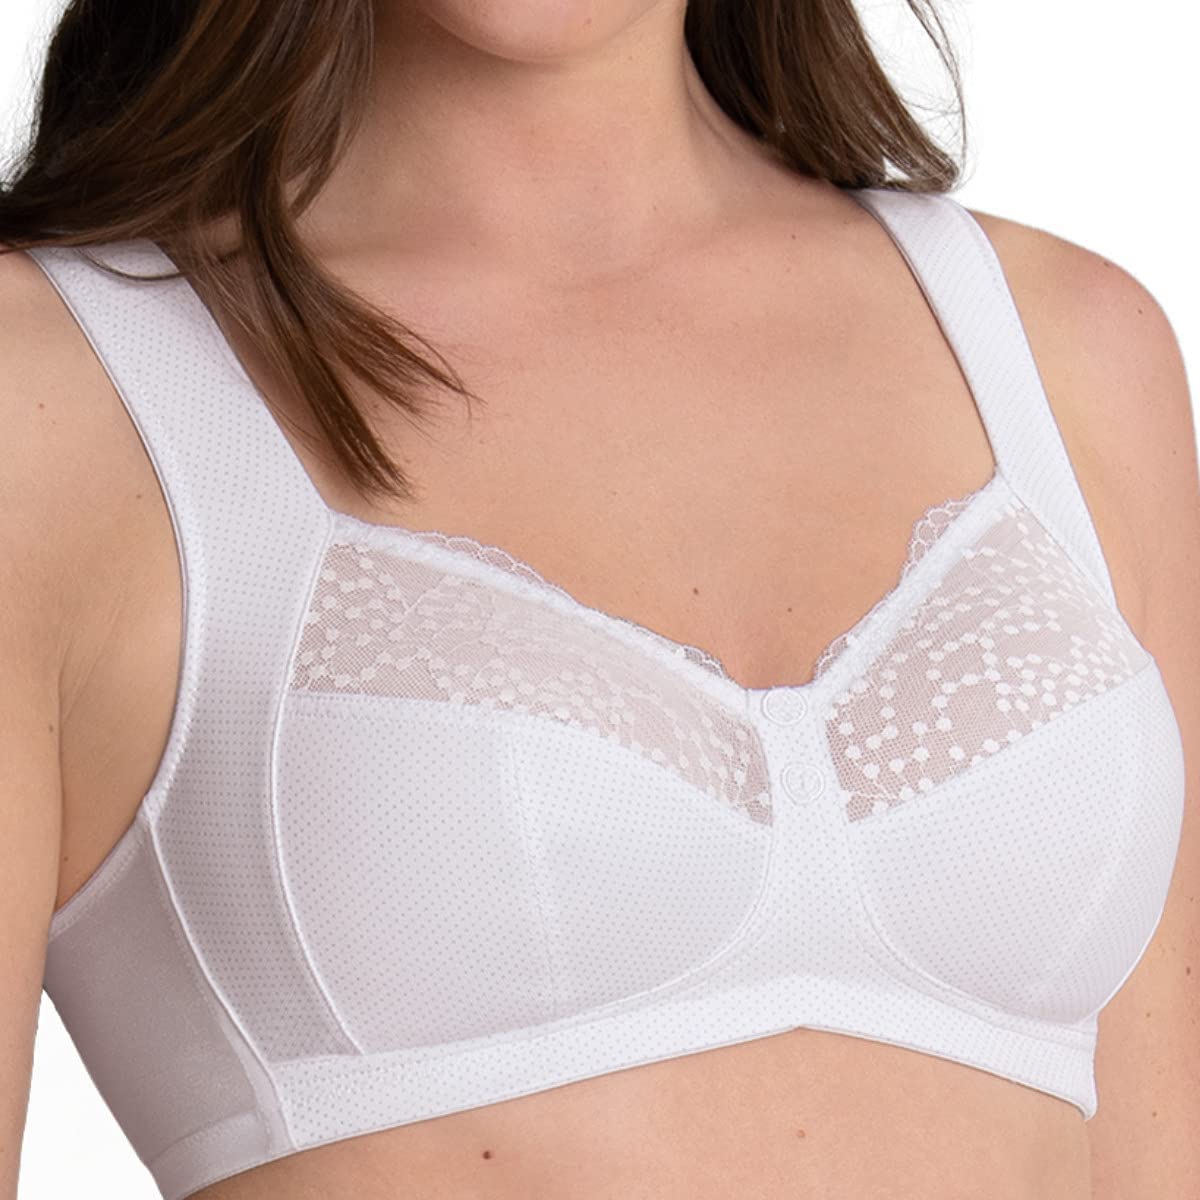 Vicanie's The Bra Fitting Specialists - Minimalist, yet effective, the Clara  bra from Anita features an attractive, wire free design. Adjustable, wide  comfort straps guarantee firm support and the seamless, pre-shaped cups